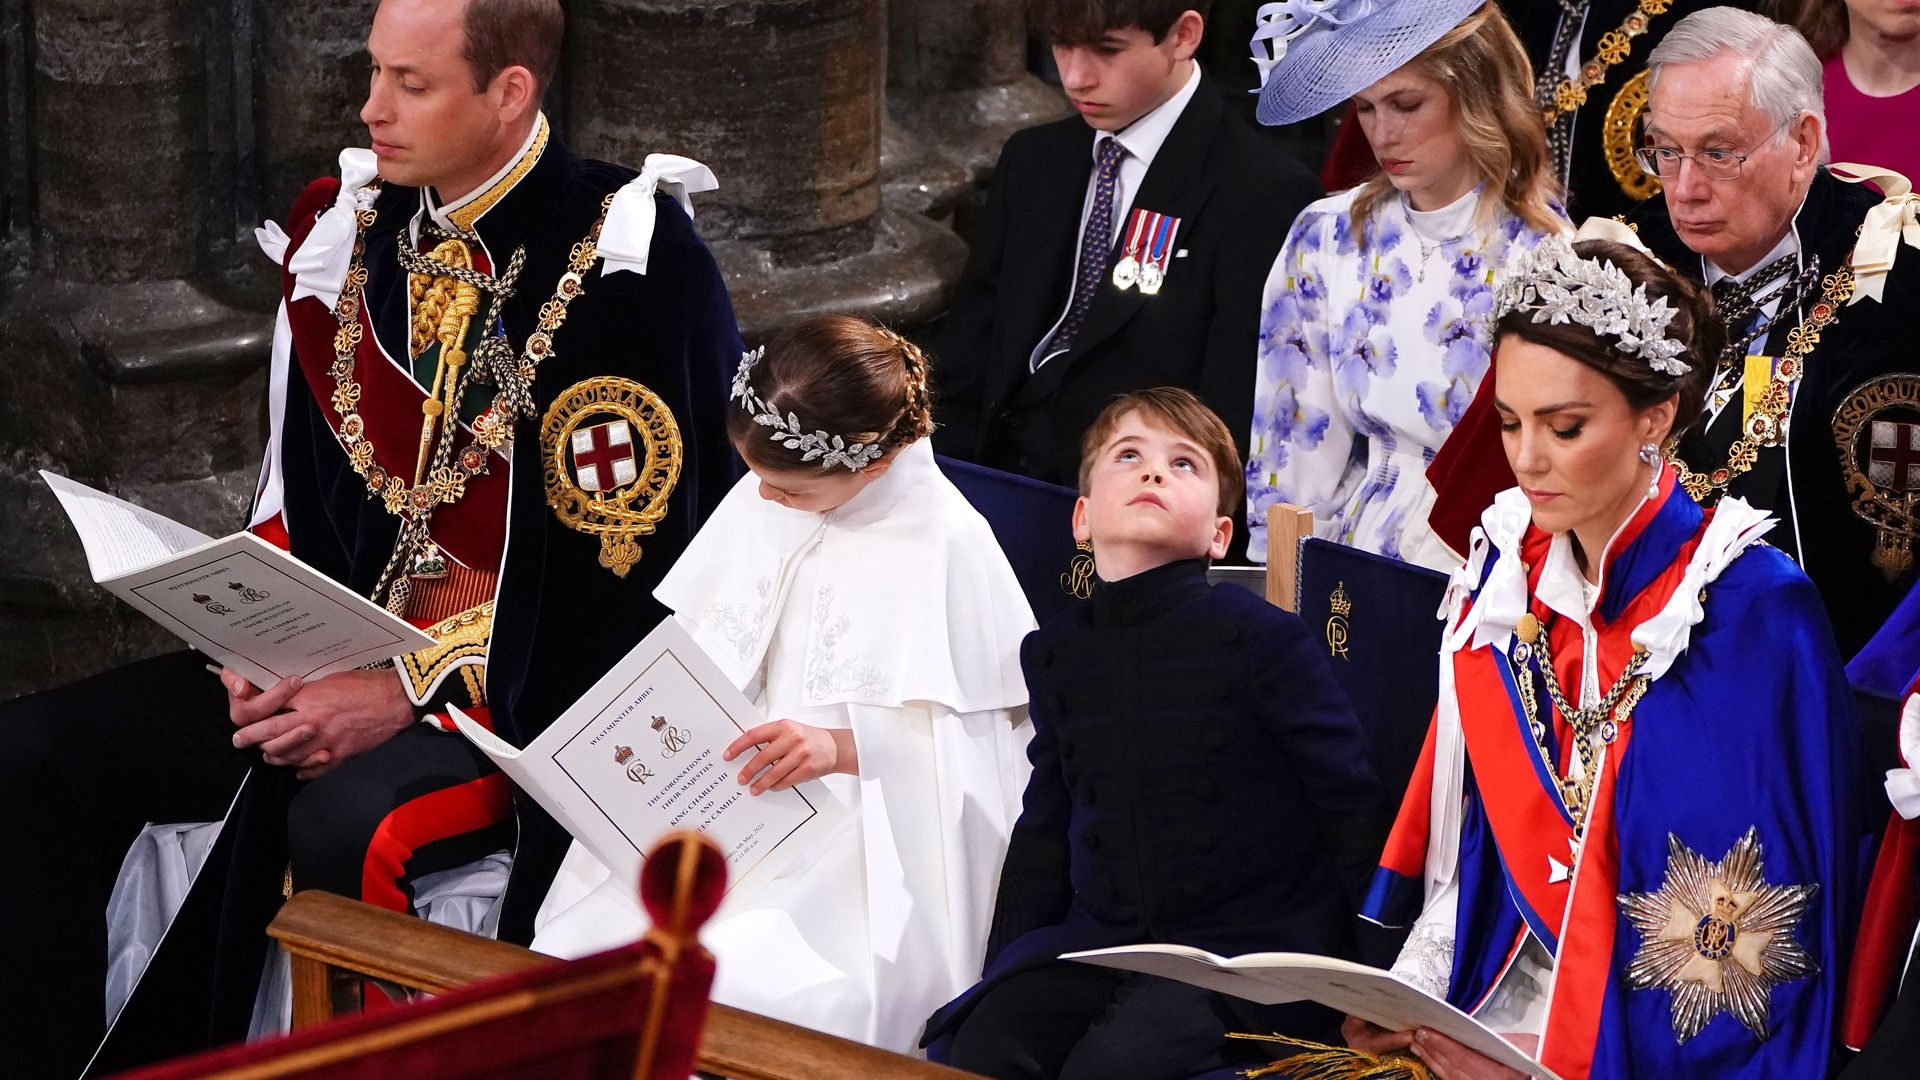 Prince Louis and Princess Charlotte sat between their parents